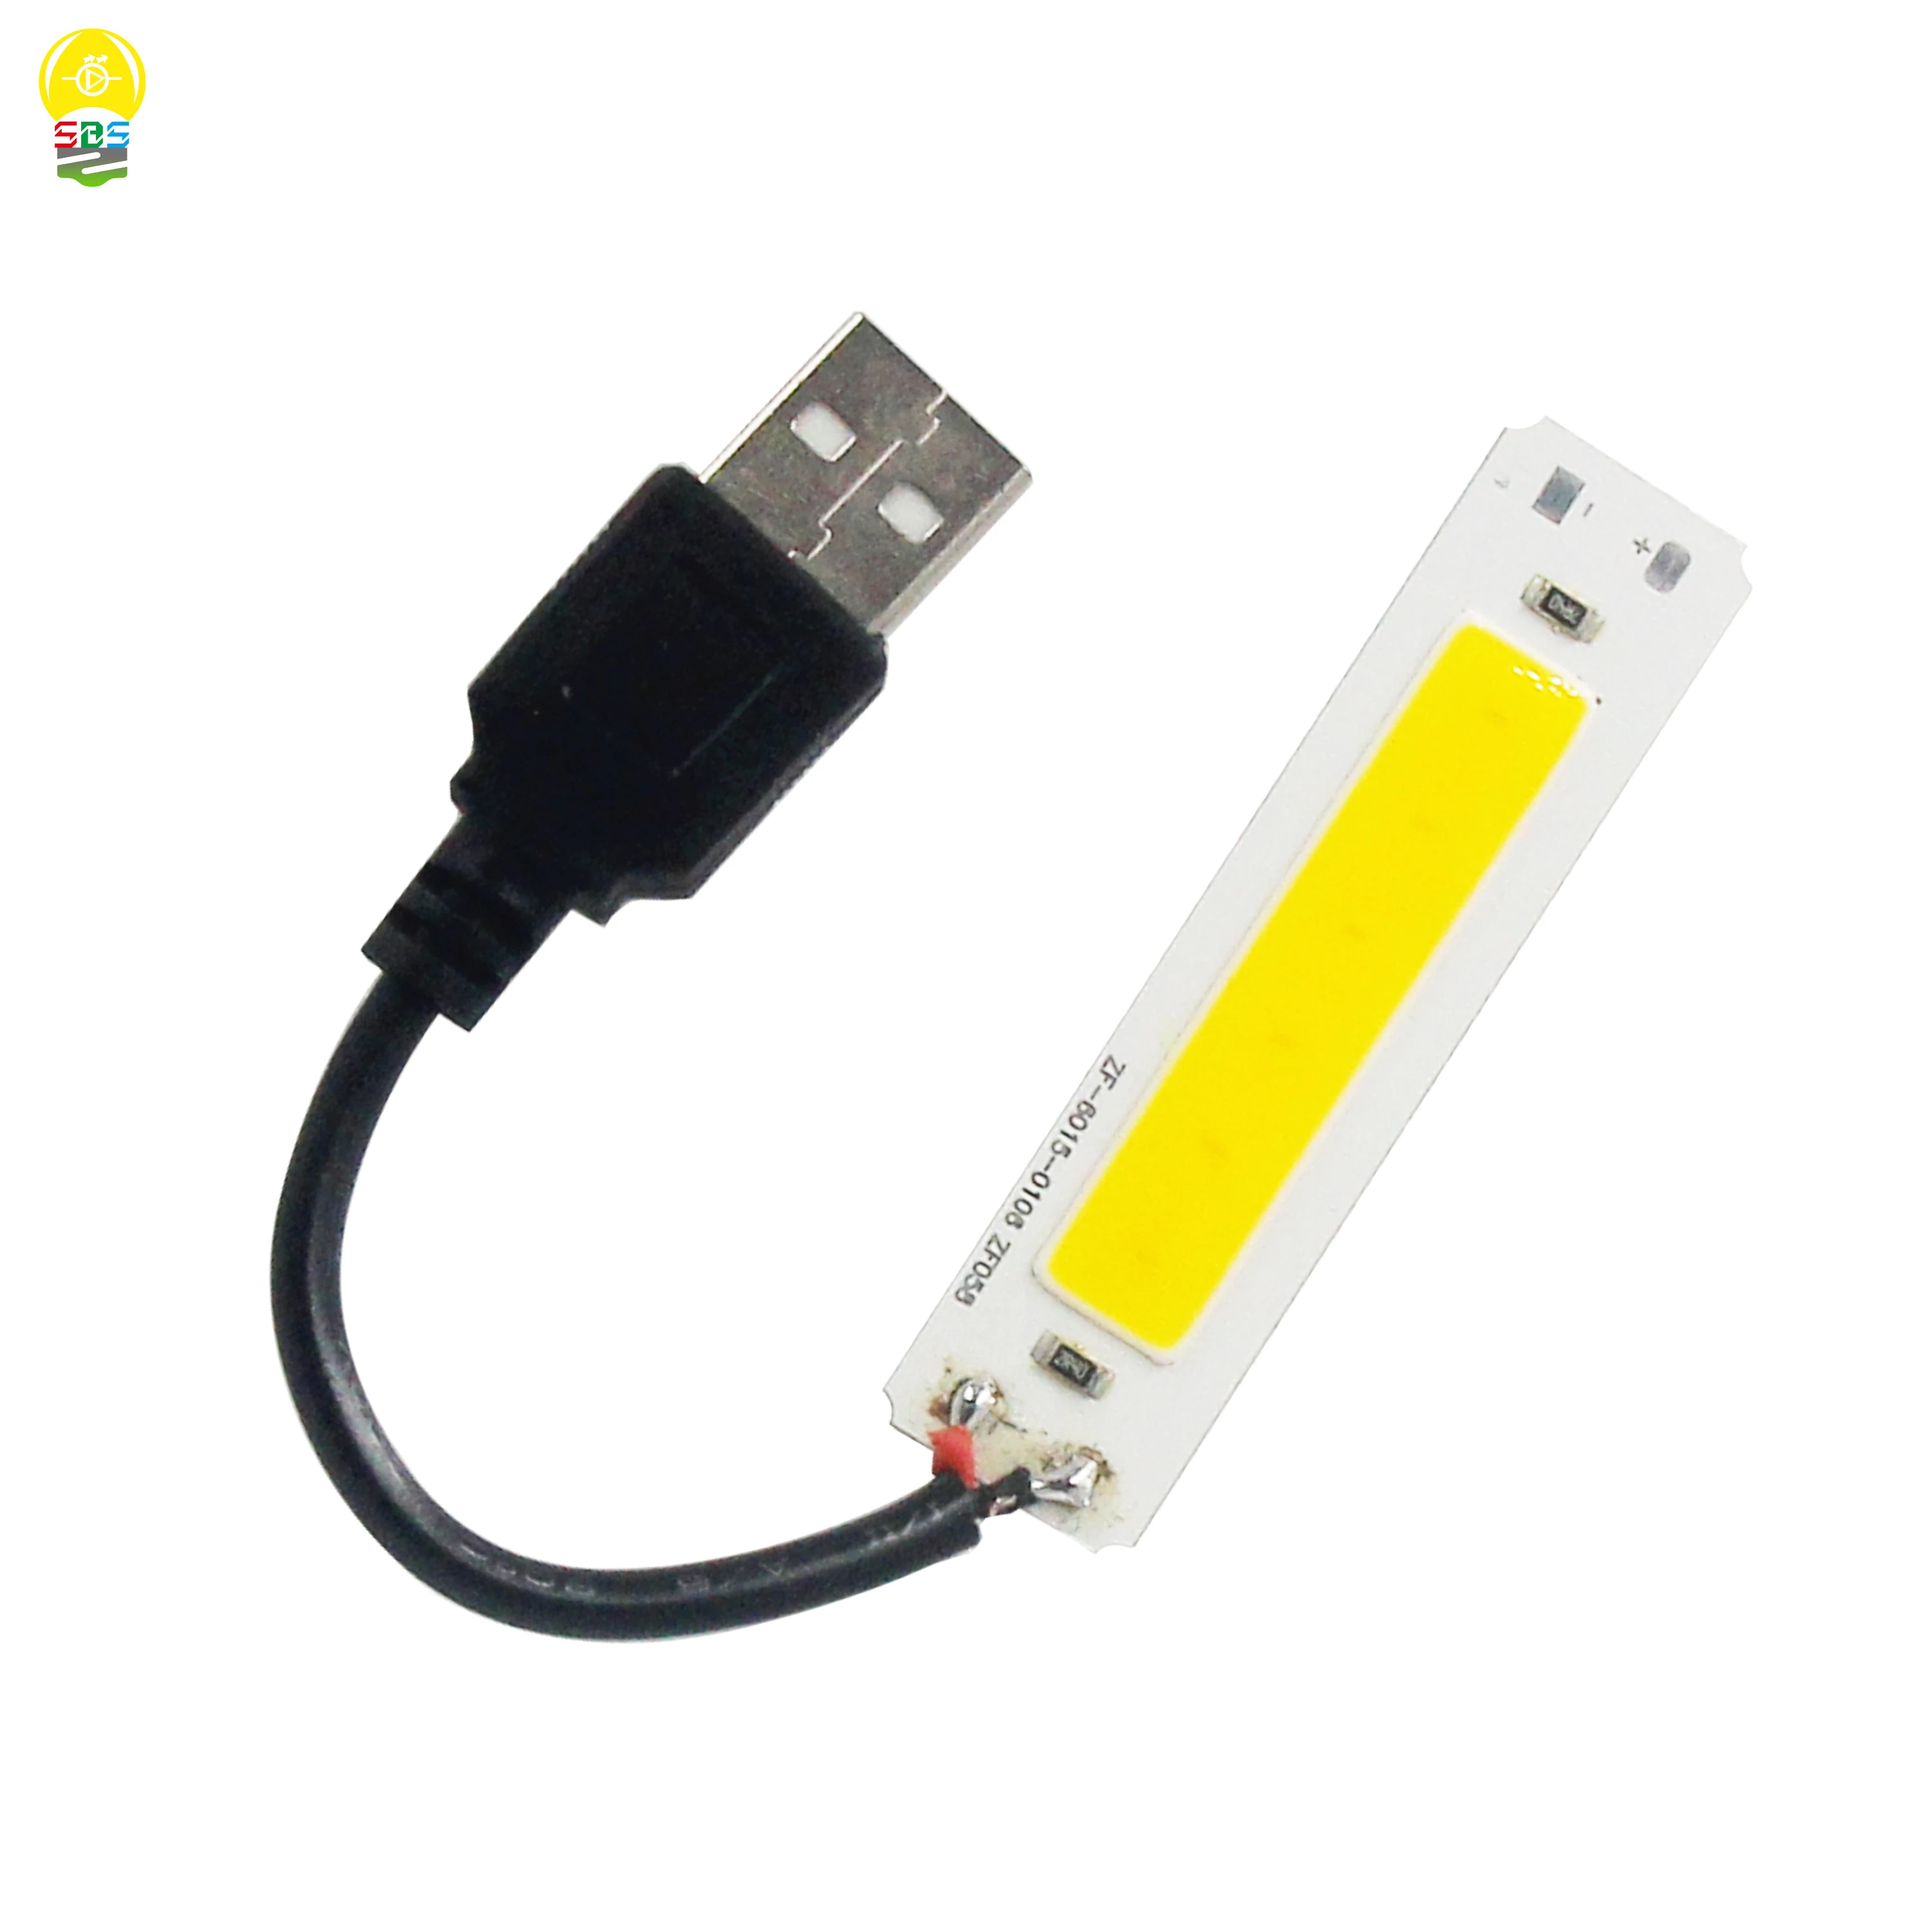 theft clarity Reconcile 60*15mm DC 5V USB led light source 2W LED COB Chip on board warm cold white  strip bar lighting bulb for DIY work lights|LED Bulbs & Tubes| - AliExpress